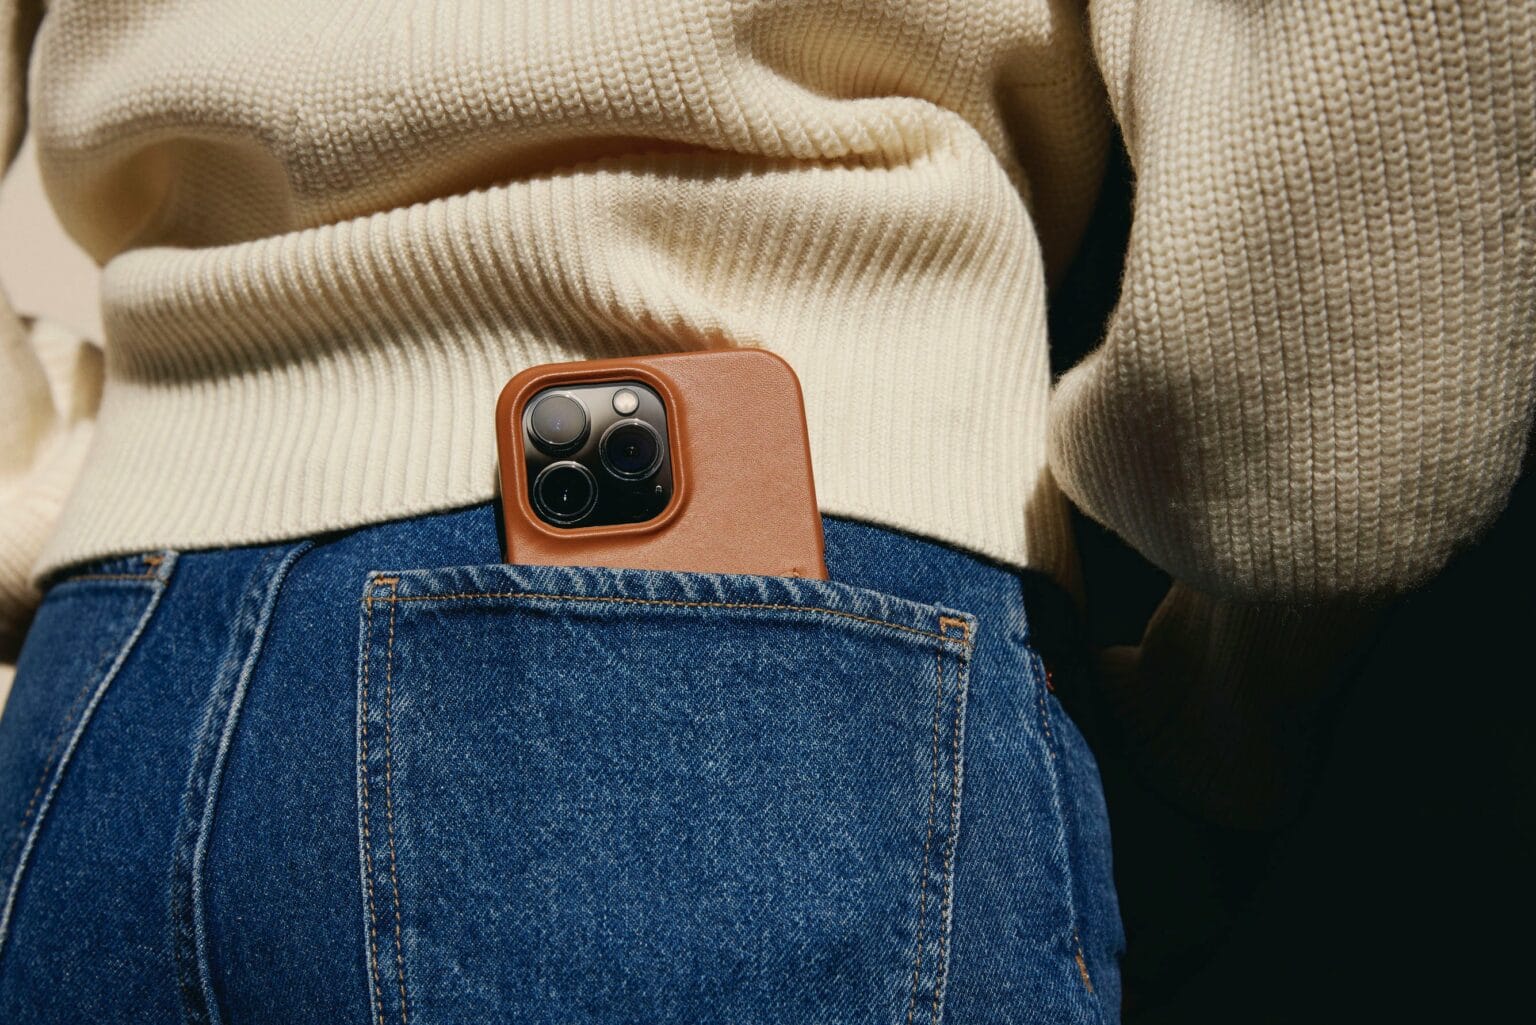 Mujjo's new cases feature Ecco leather and machined metal buttons.